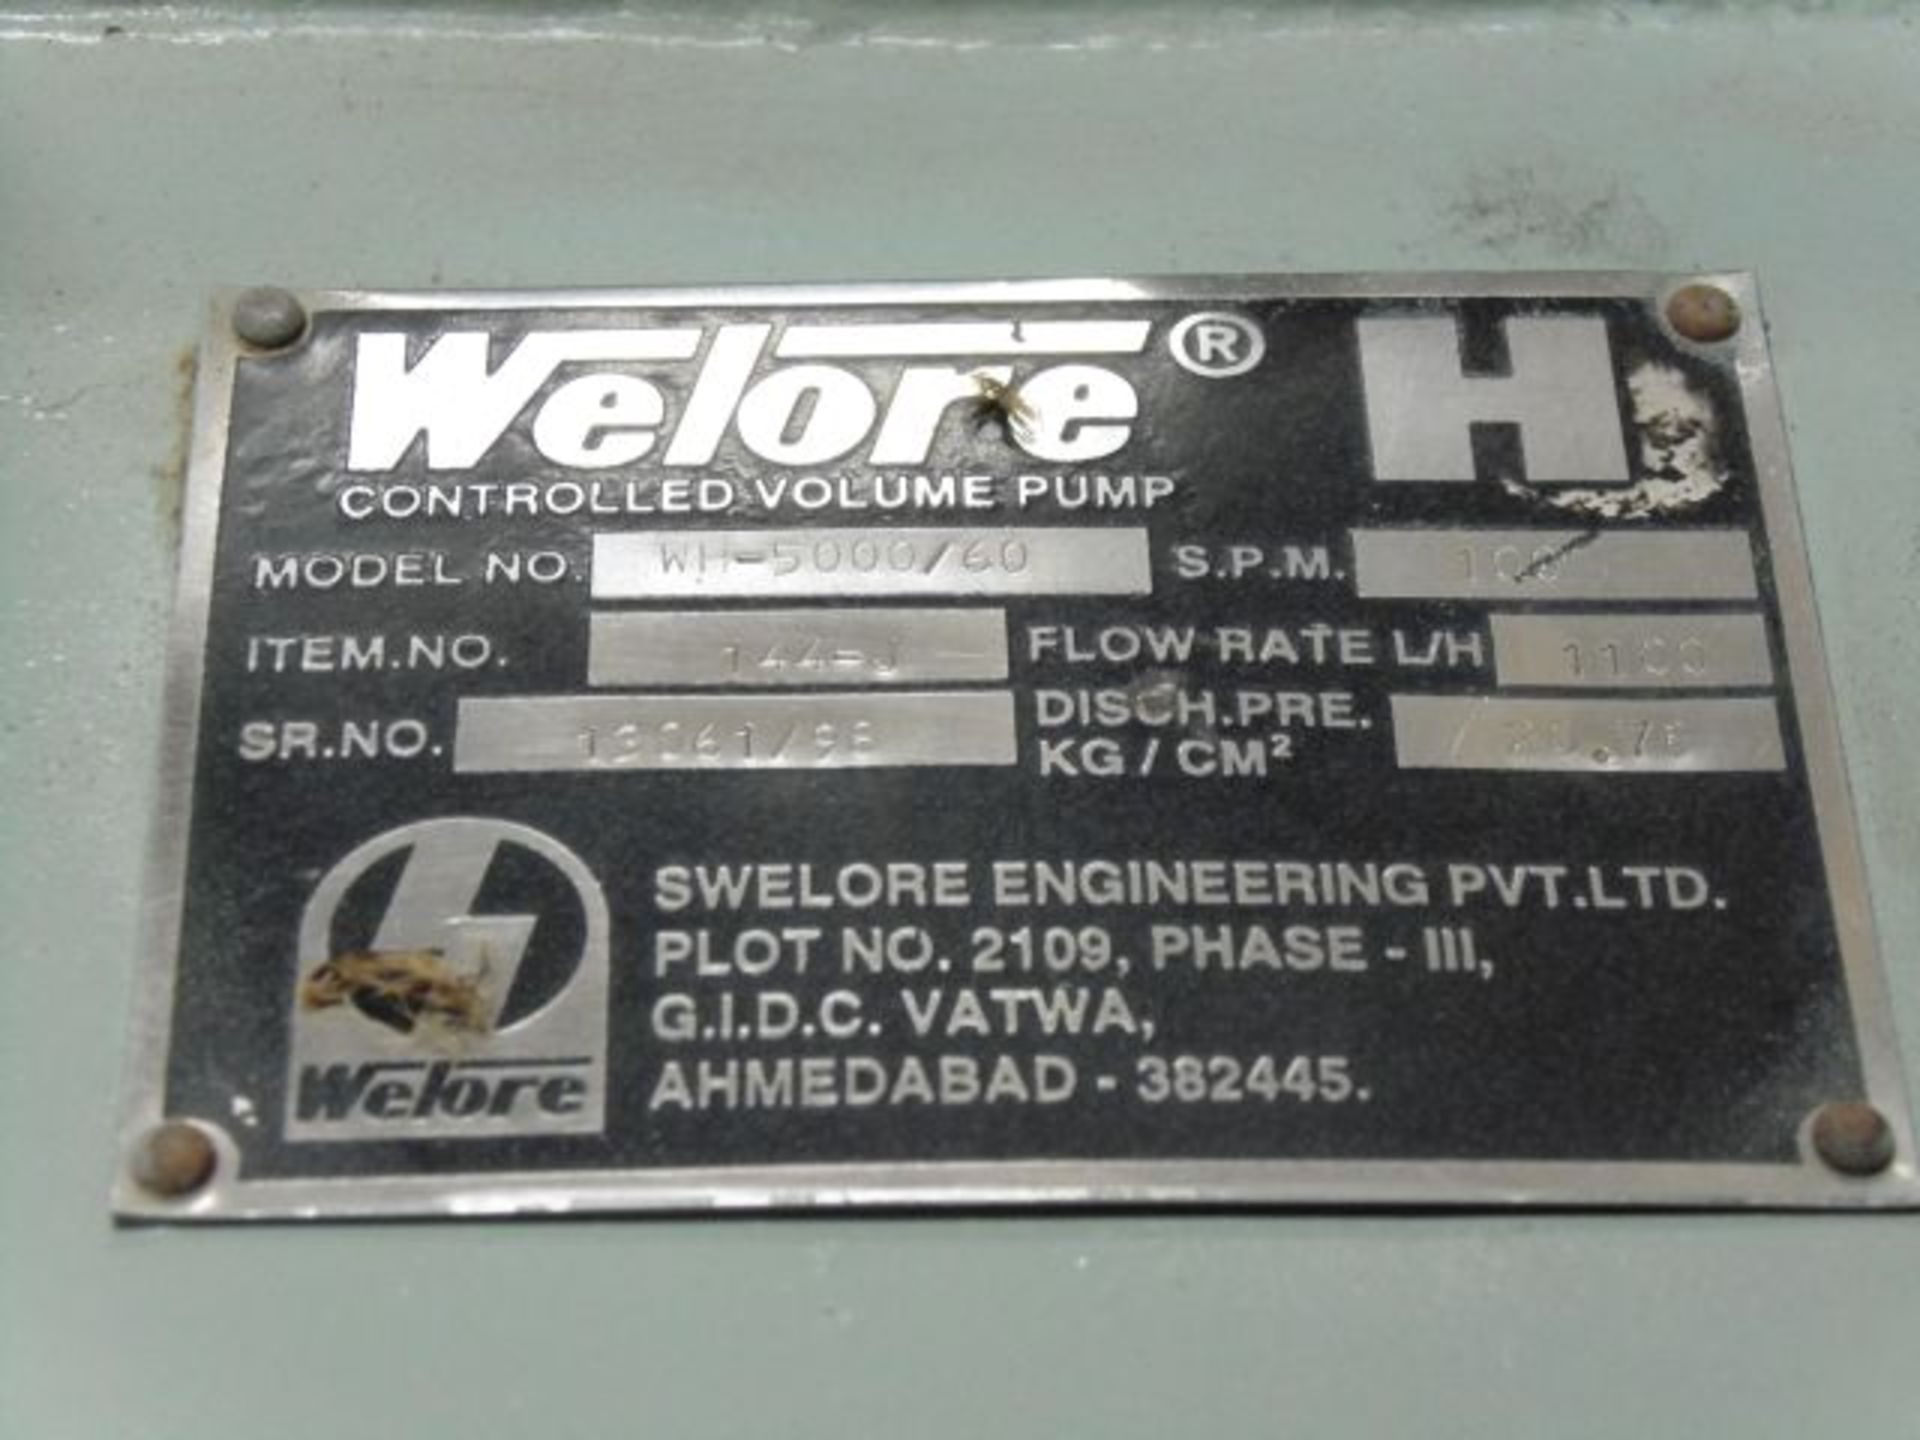 Welore Model WH-5000/60 Controlled Volume Pump; S.P.M. 100; Flow Rate 1100 LTR/H; Discharge Pressure - Image 2 of 2